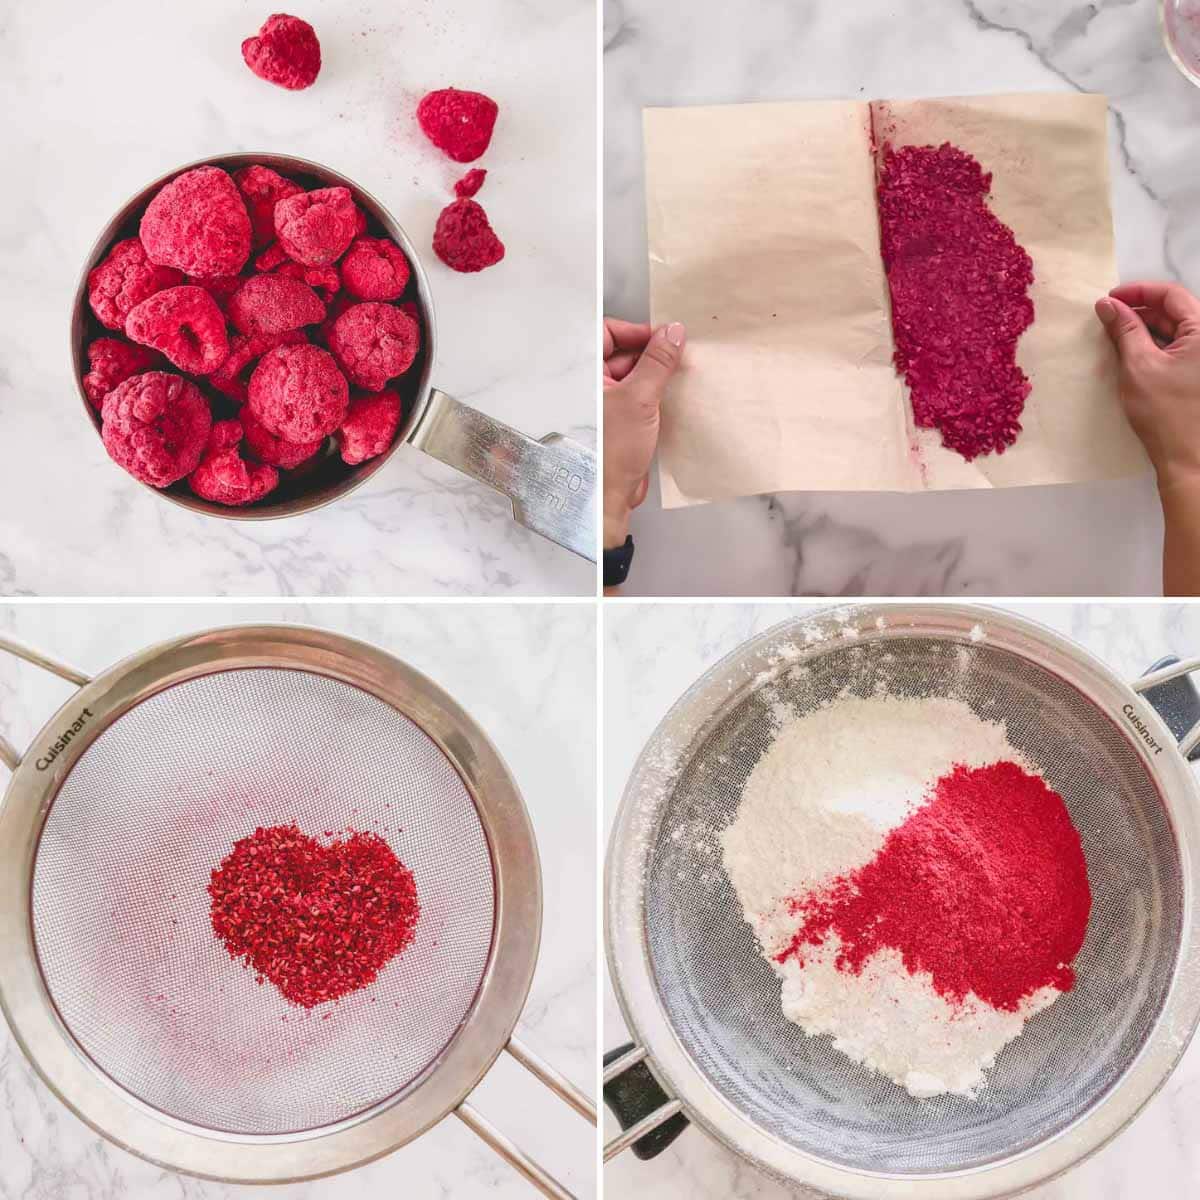 Step by step photos of crushing freeze-dried raspberries and sifting dry ingredients.